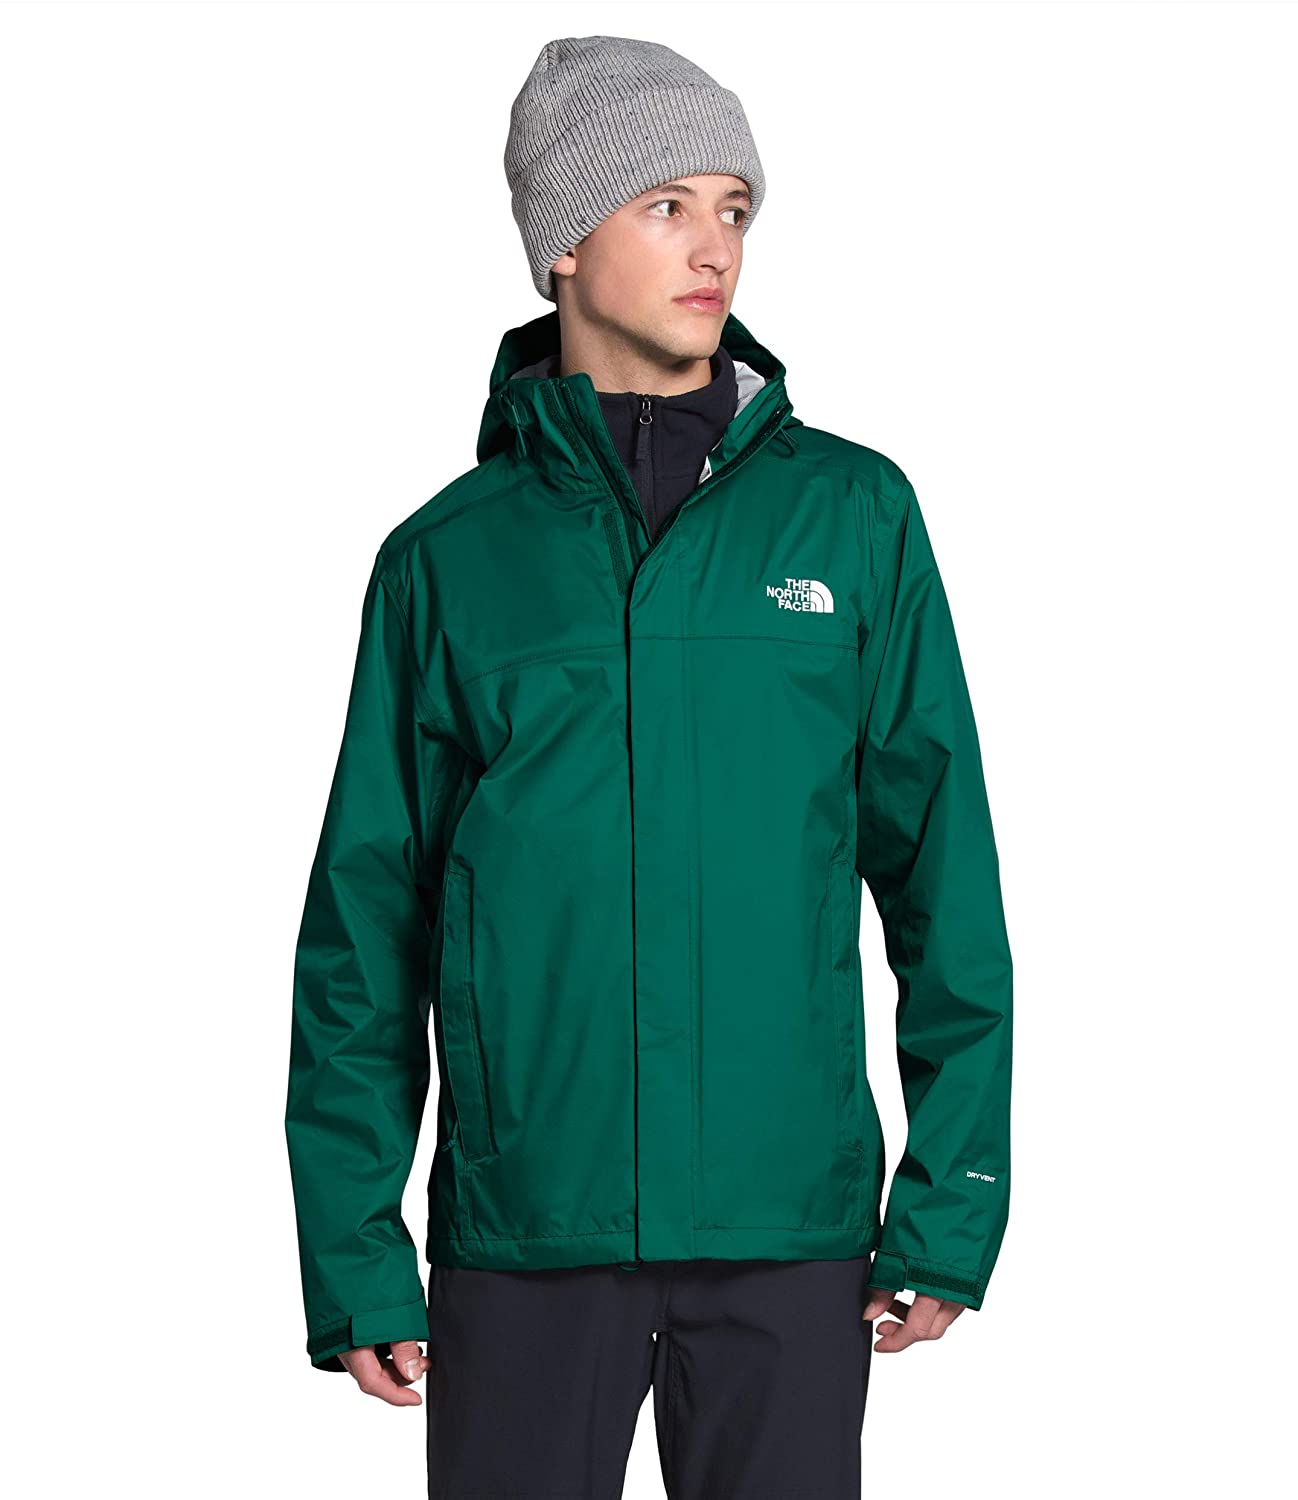 Men's The North Face Venture 2 Jacket in Evergreen from the front